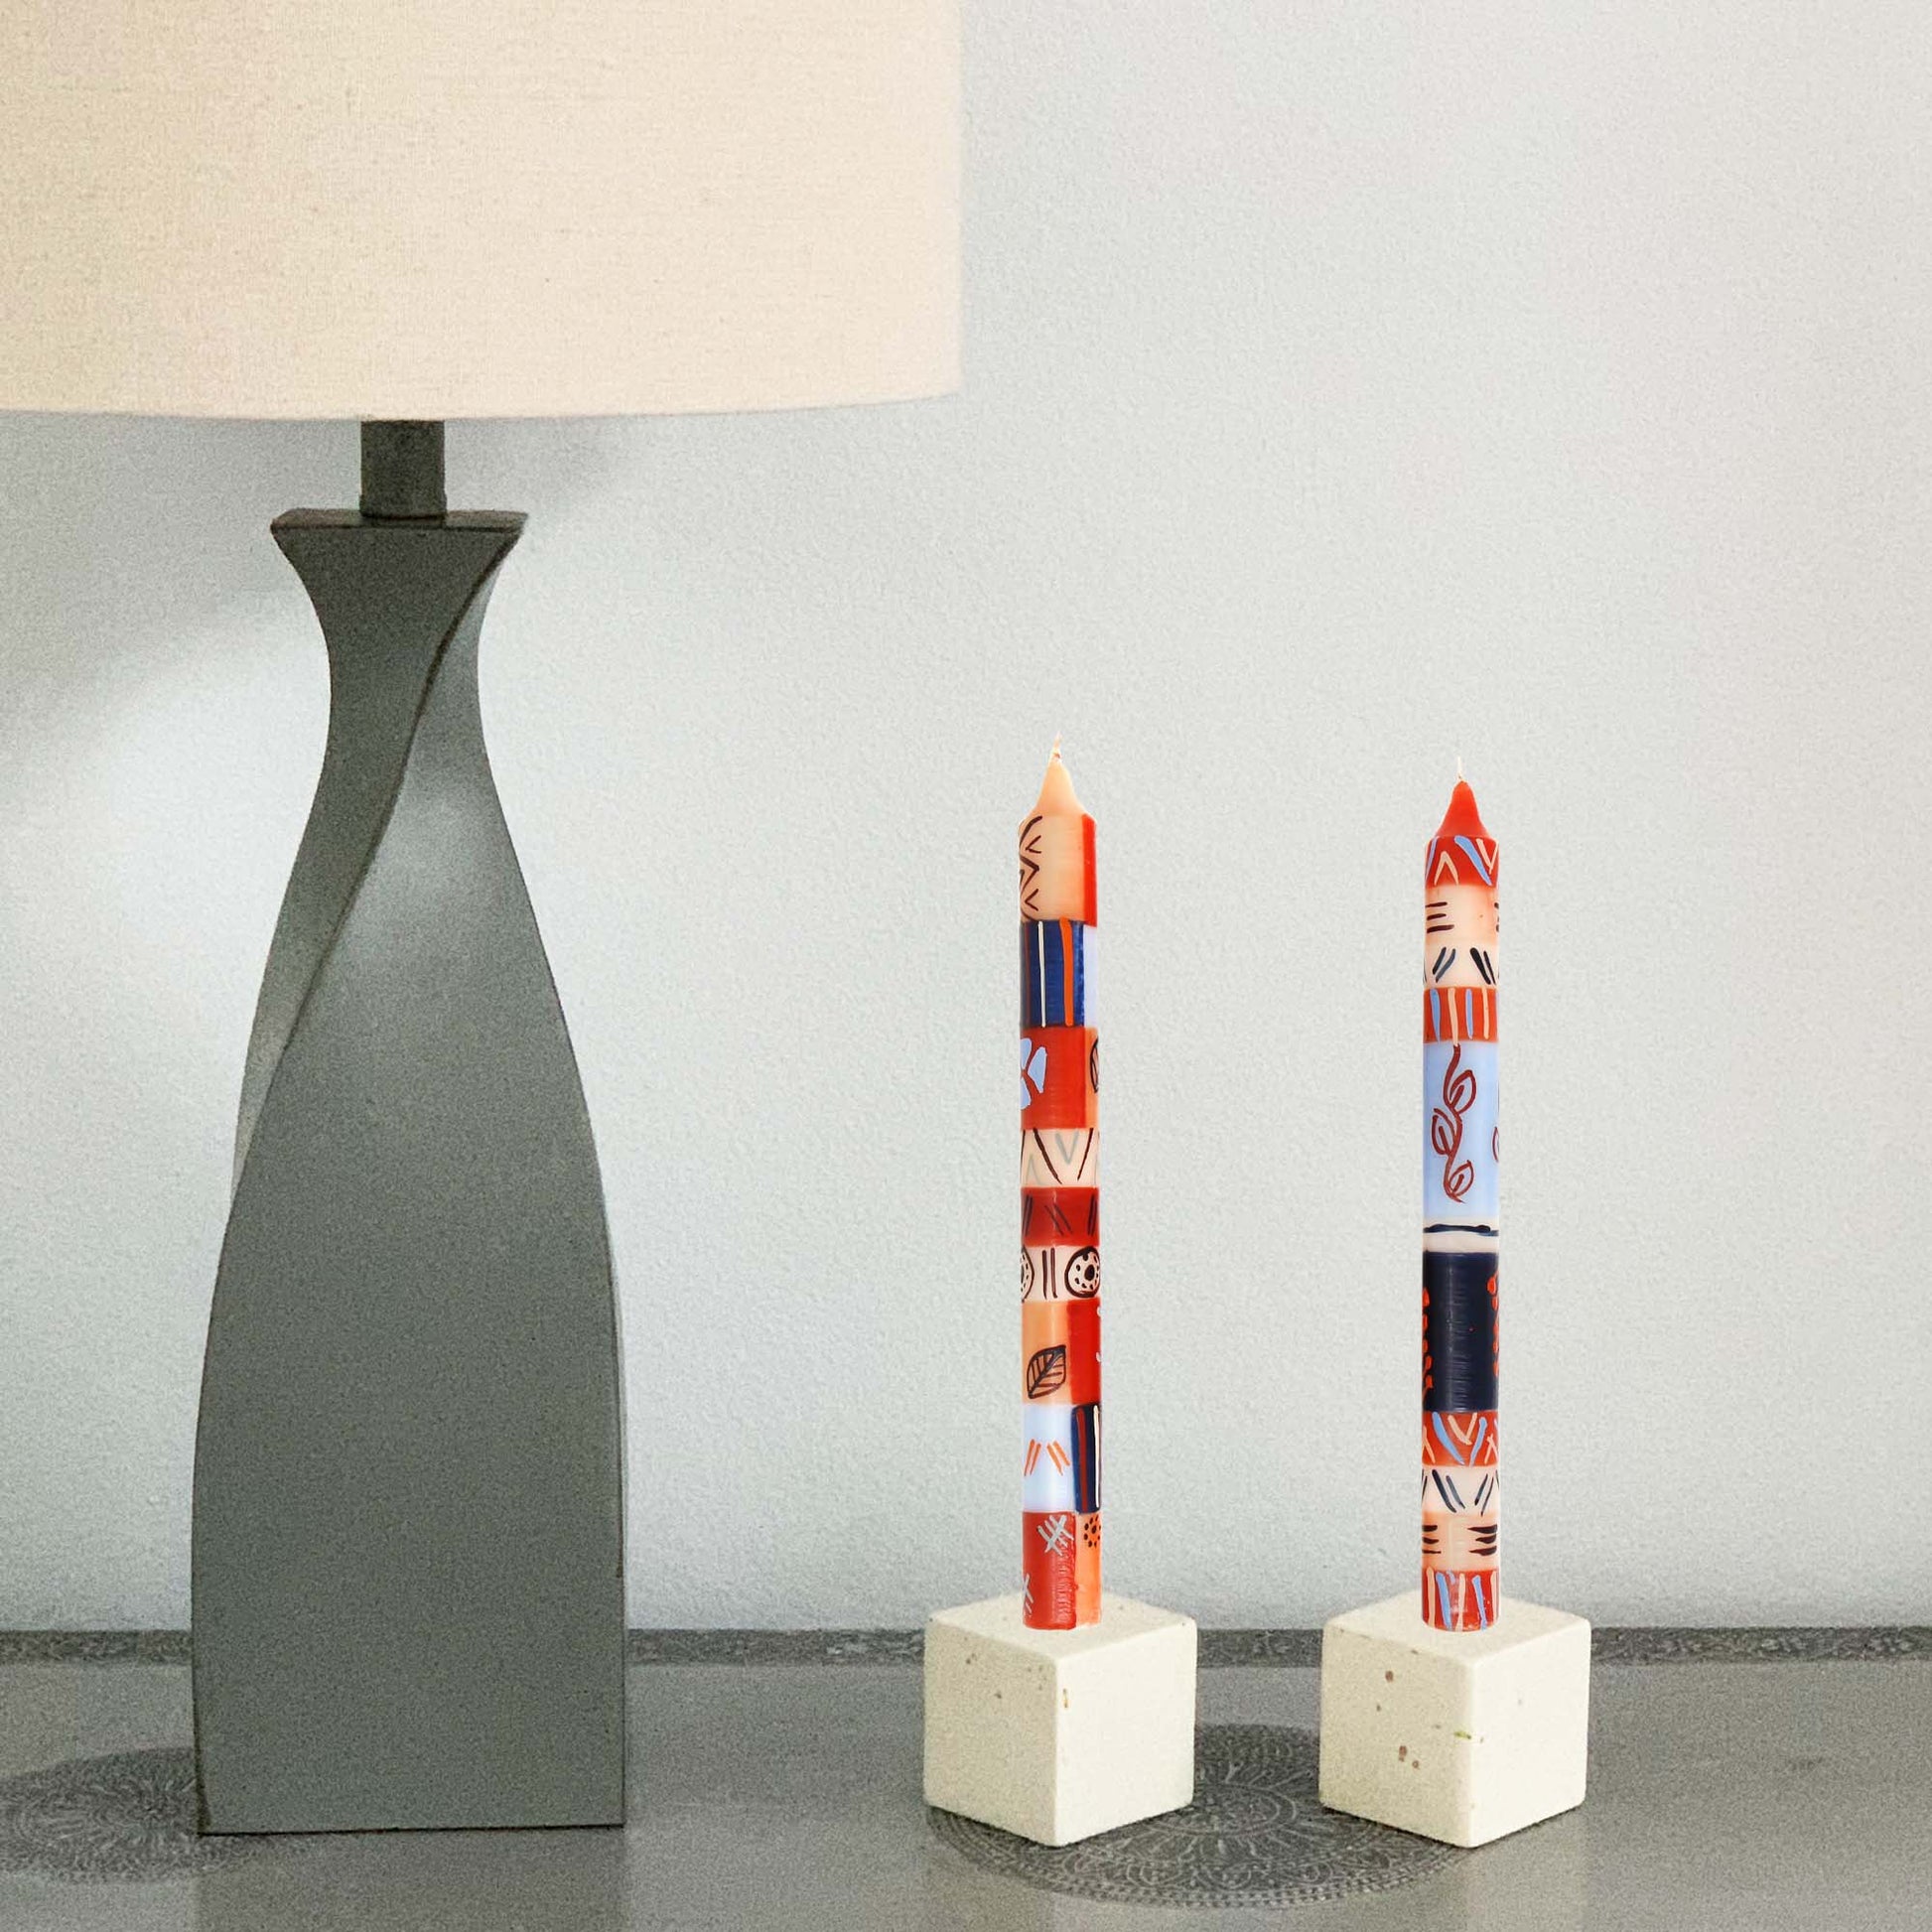 Hand Painted Candles in Uzushi Design (three tapers) - Nobunto - Linda Kay Gifford’s - Those Nasty Women TALK! by SWEETSurvivor